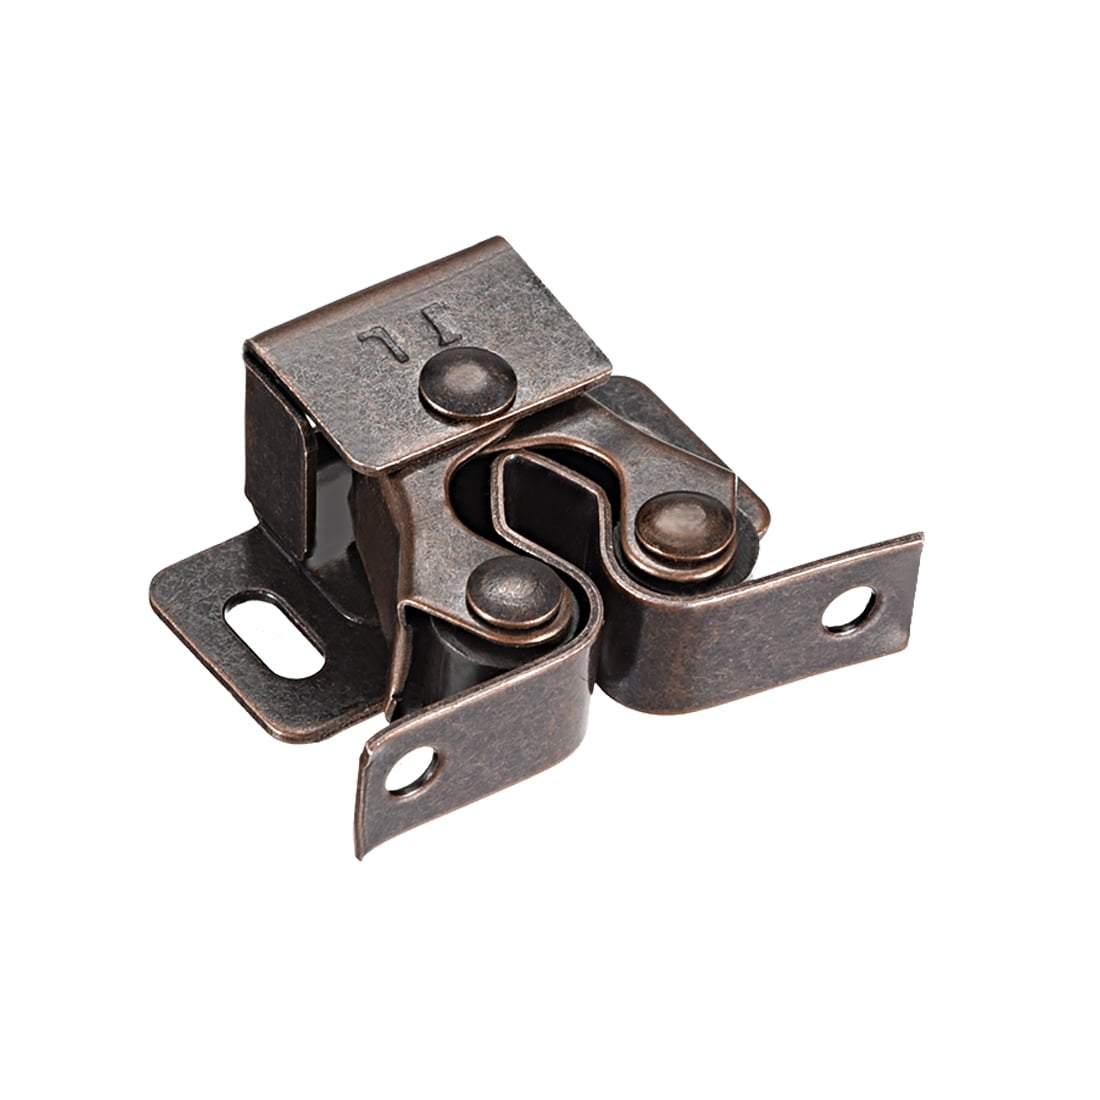 uxcell a15030900ux0026 Cabinet Wardrobe Door Double Ball Roller Catch Latch Copper Tone 47mm